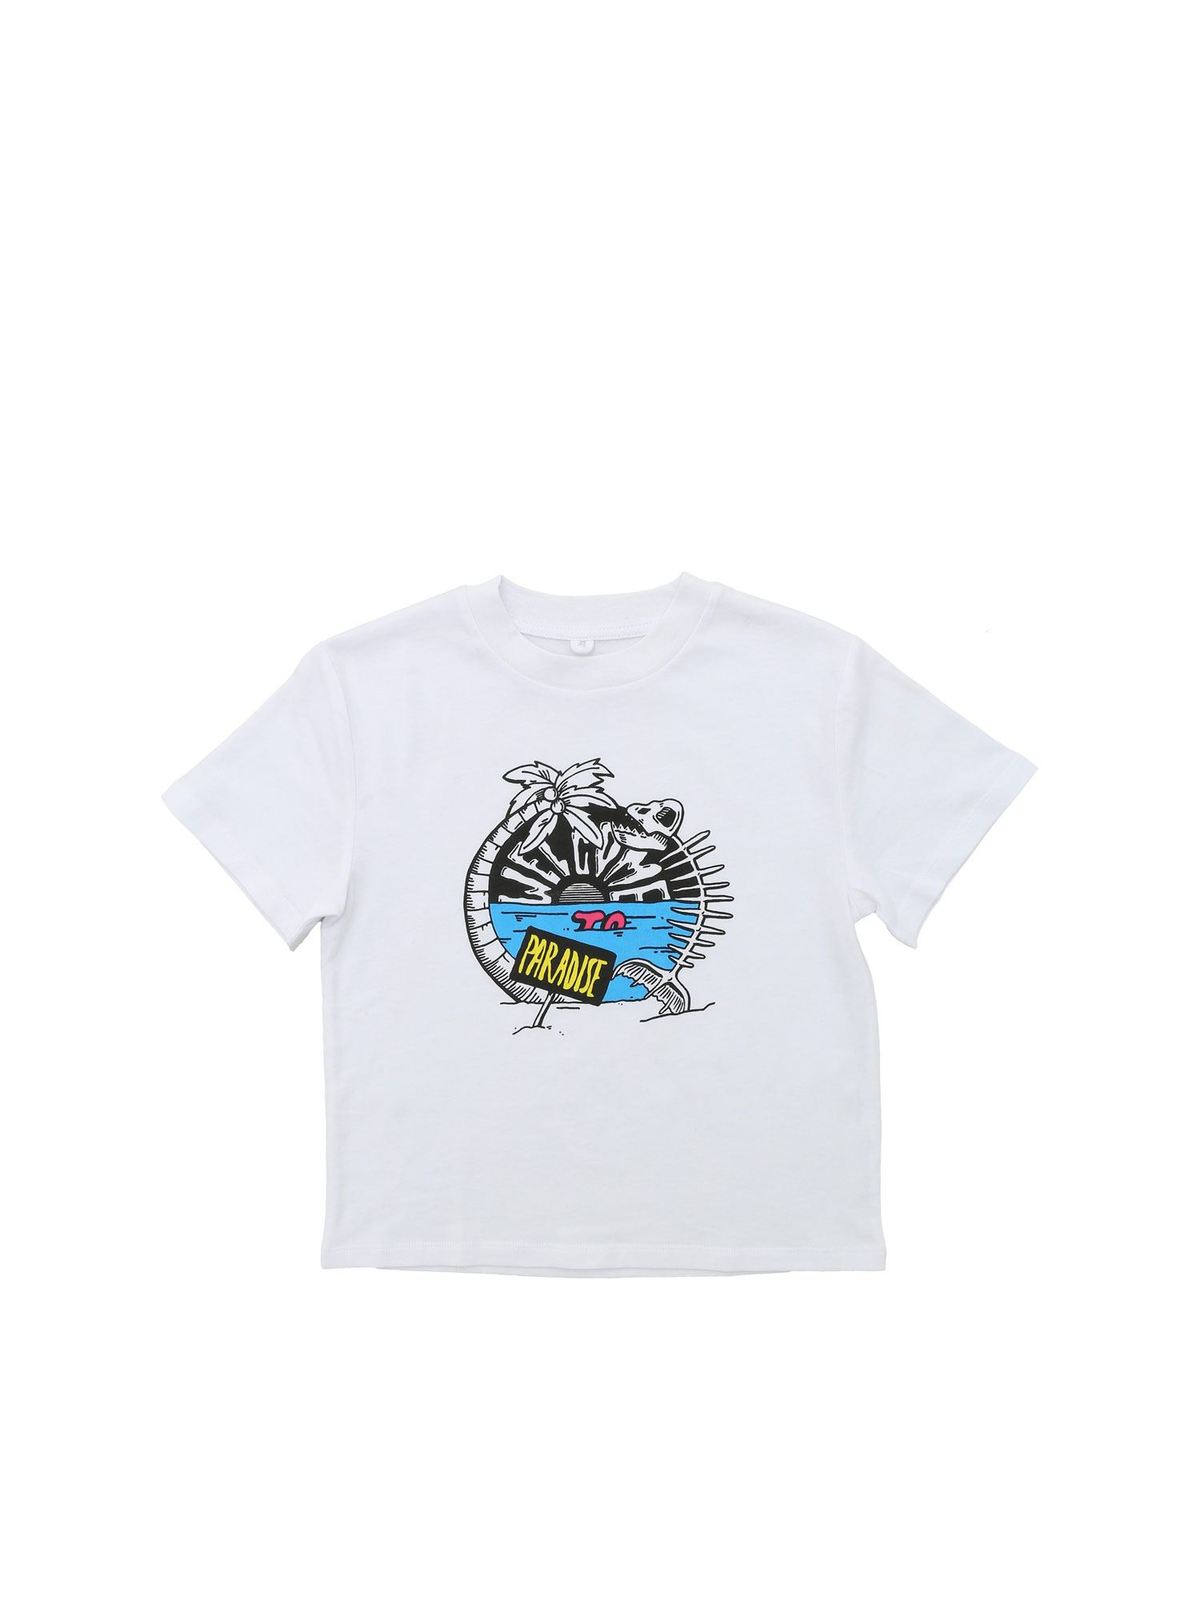 STELLA MCCARTNEY WELCOME TO PARADISE T-SHIRT IN WHITE